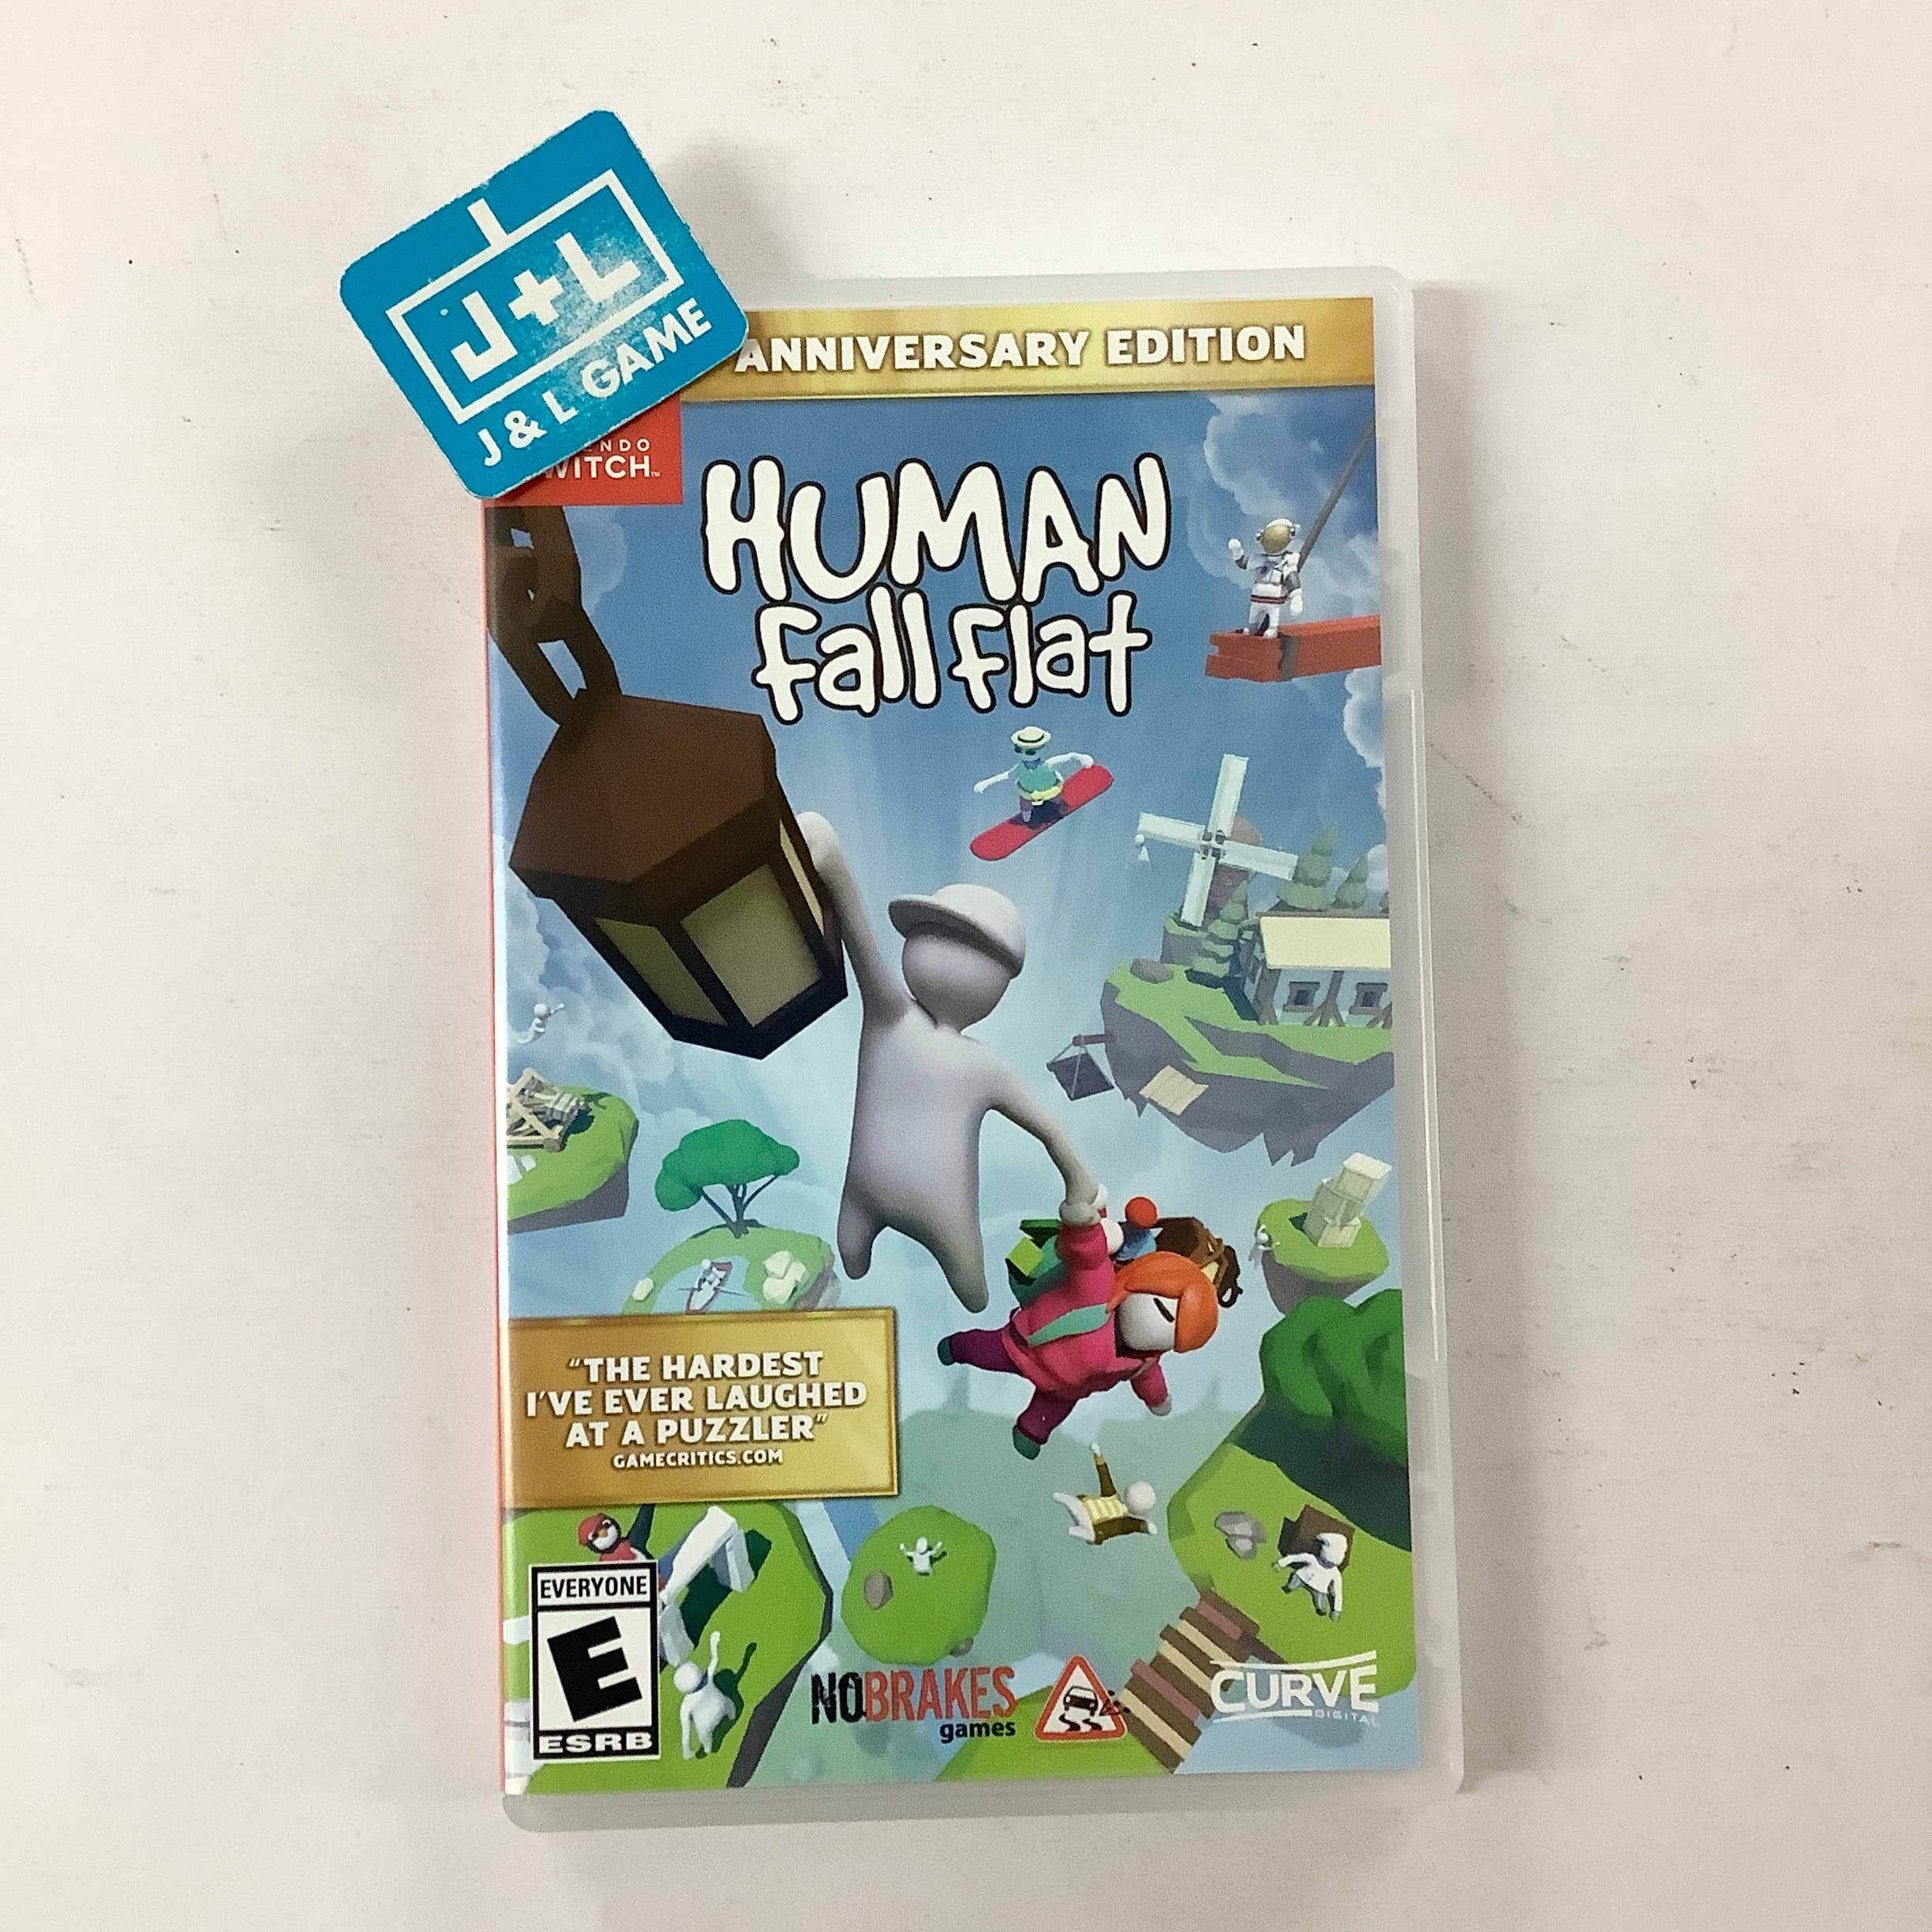 Human Fall Flat (Anniversary Edition) - (NSW) Nintendo Switch [UNBOXING] Video Games Curve Digital   